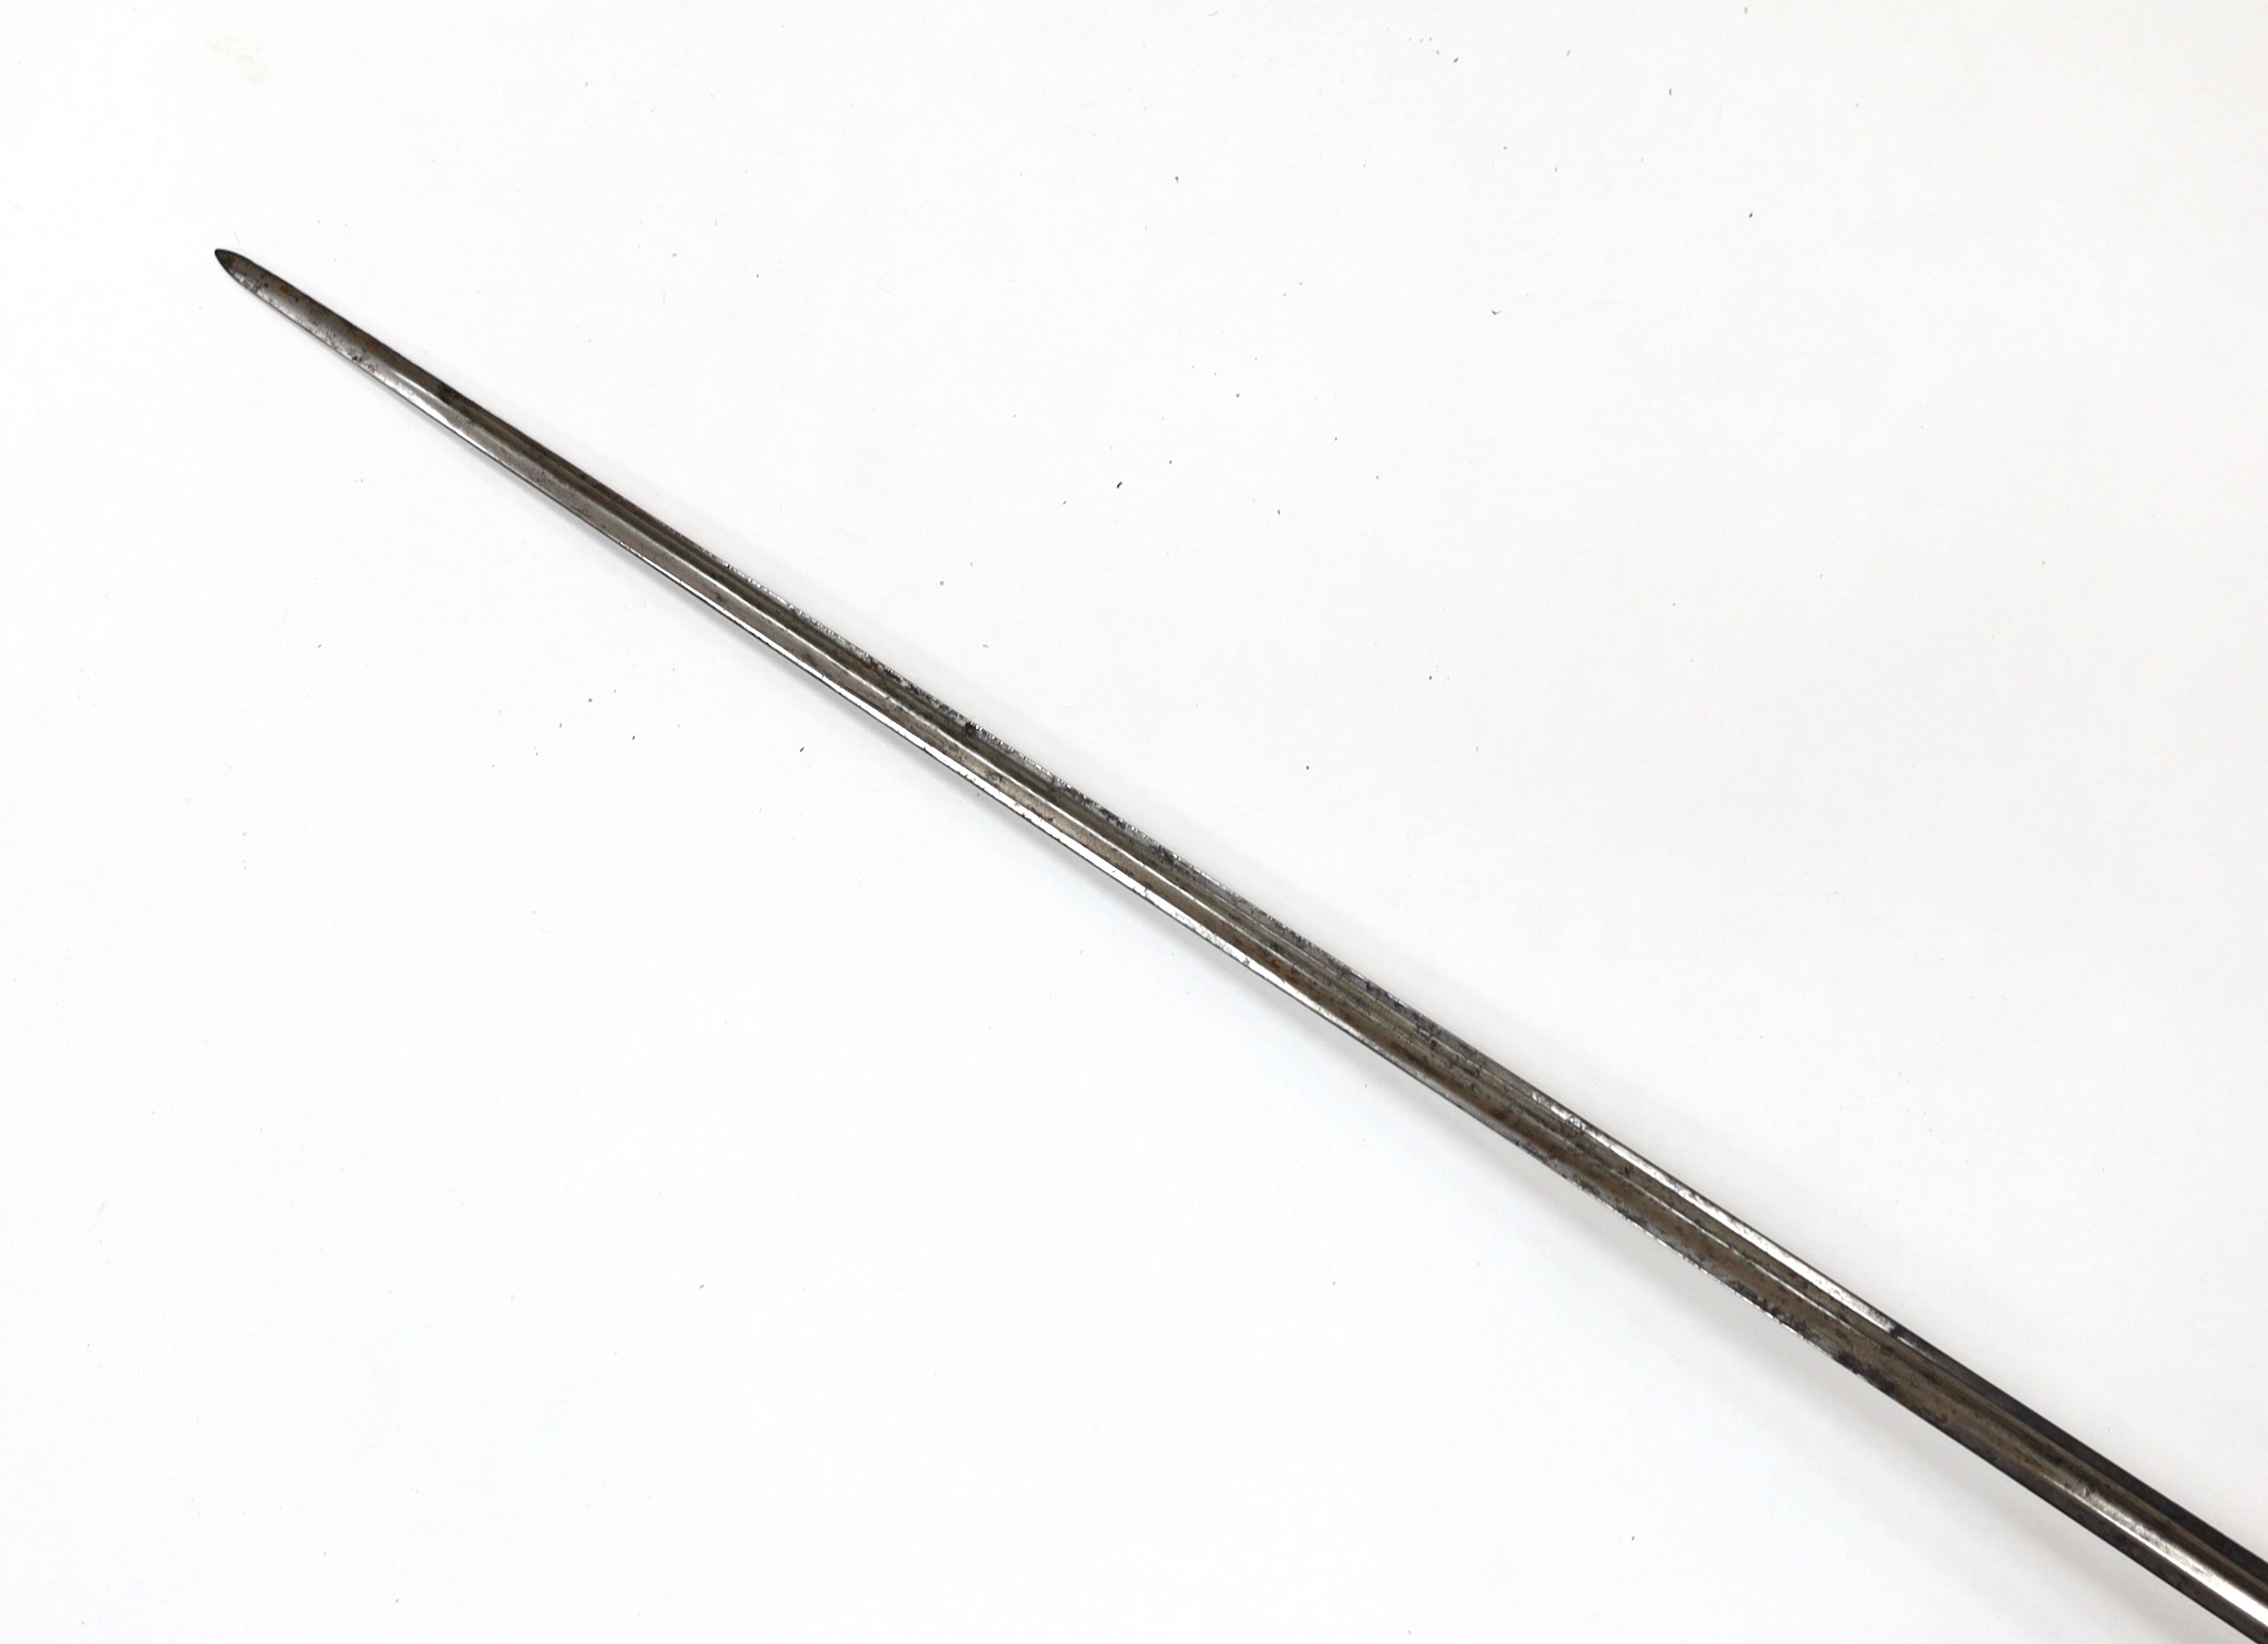 An English iron hilted small sword, c.1765, chiselled and pierced with scrolling devices and foliage, silver gilt tape and silver wire bound grip, colichemarde blade etched with scrolls and squirrel, blade 81.5cm